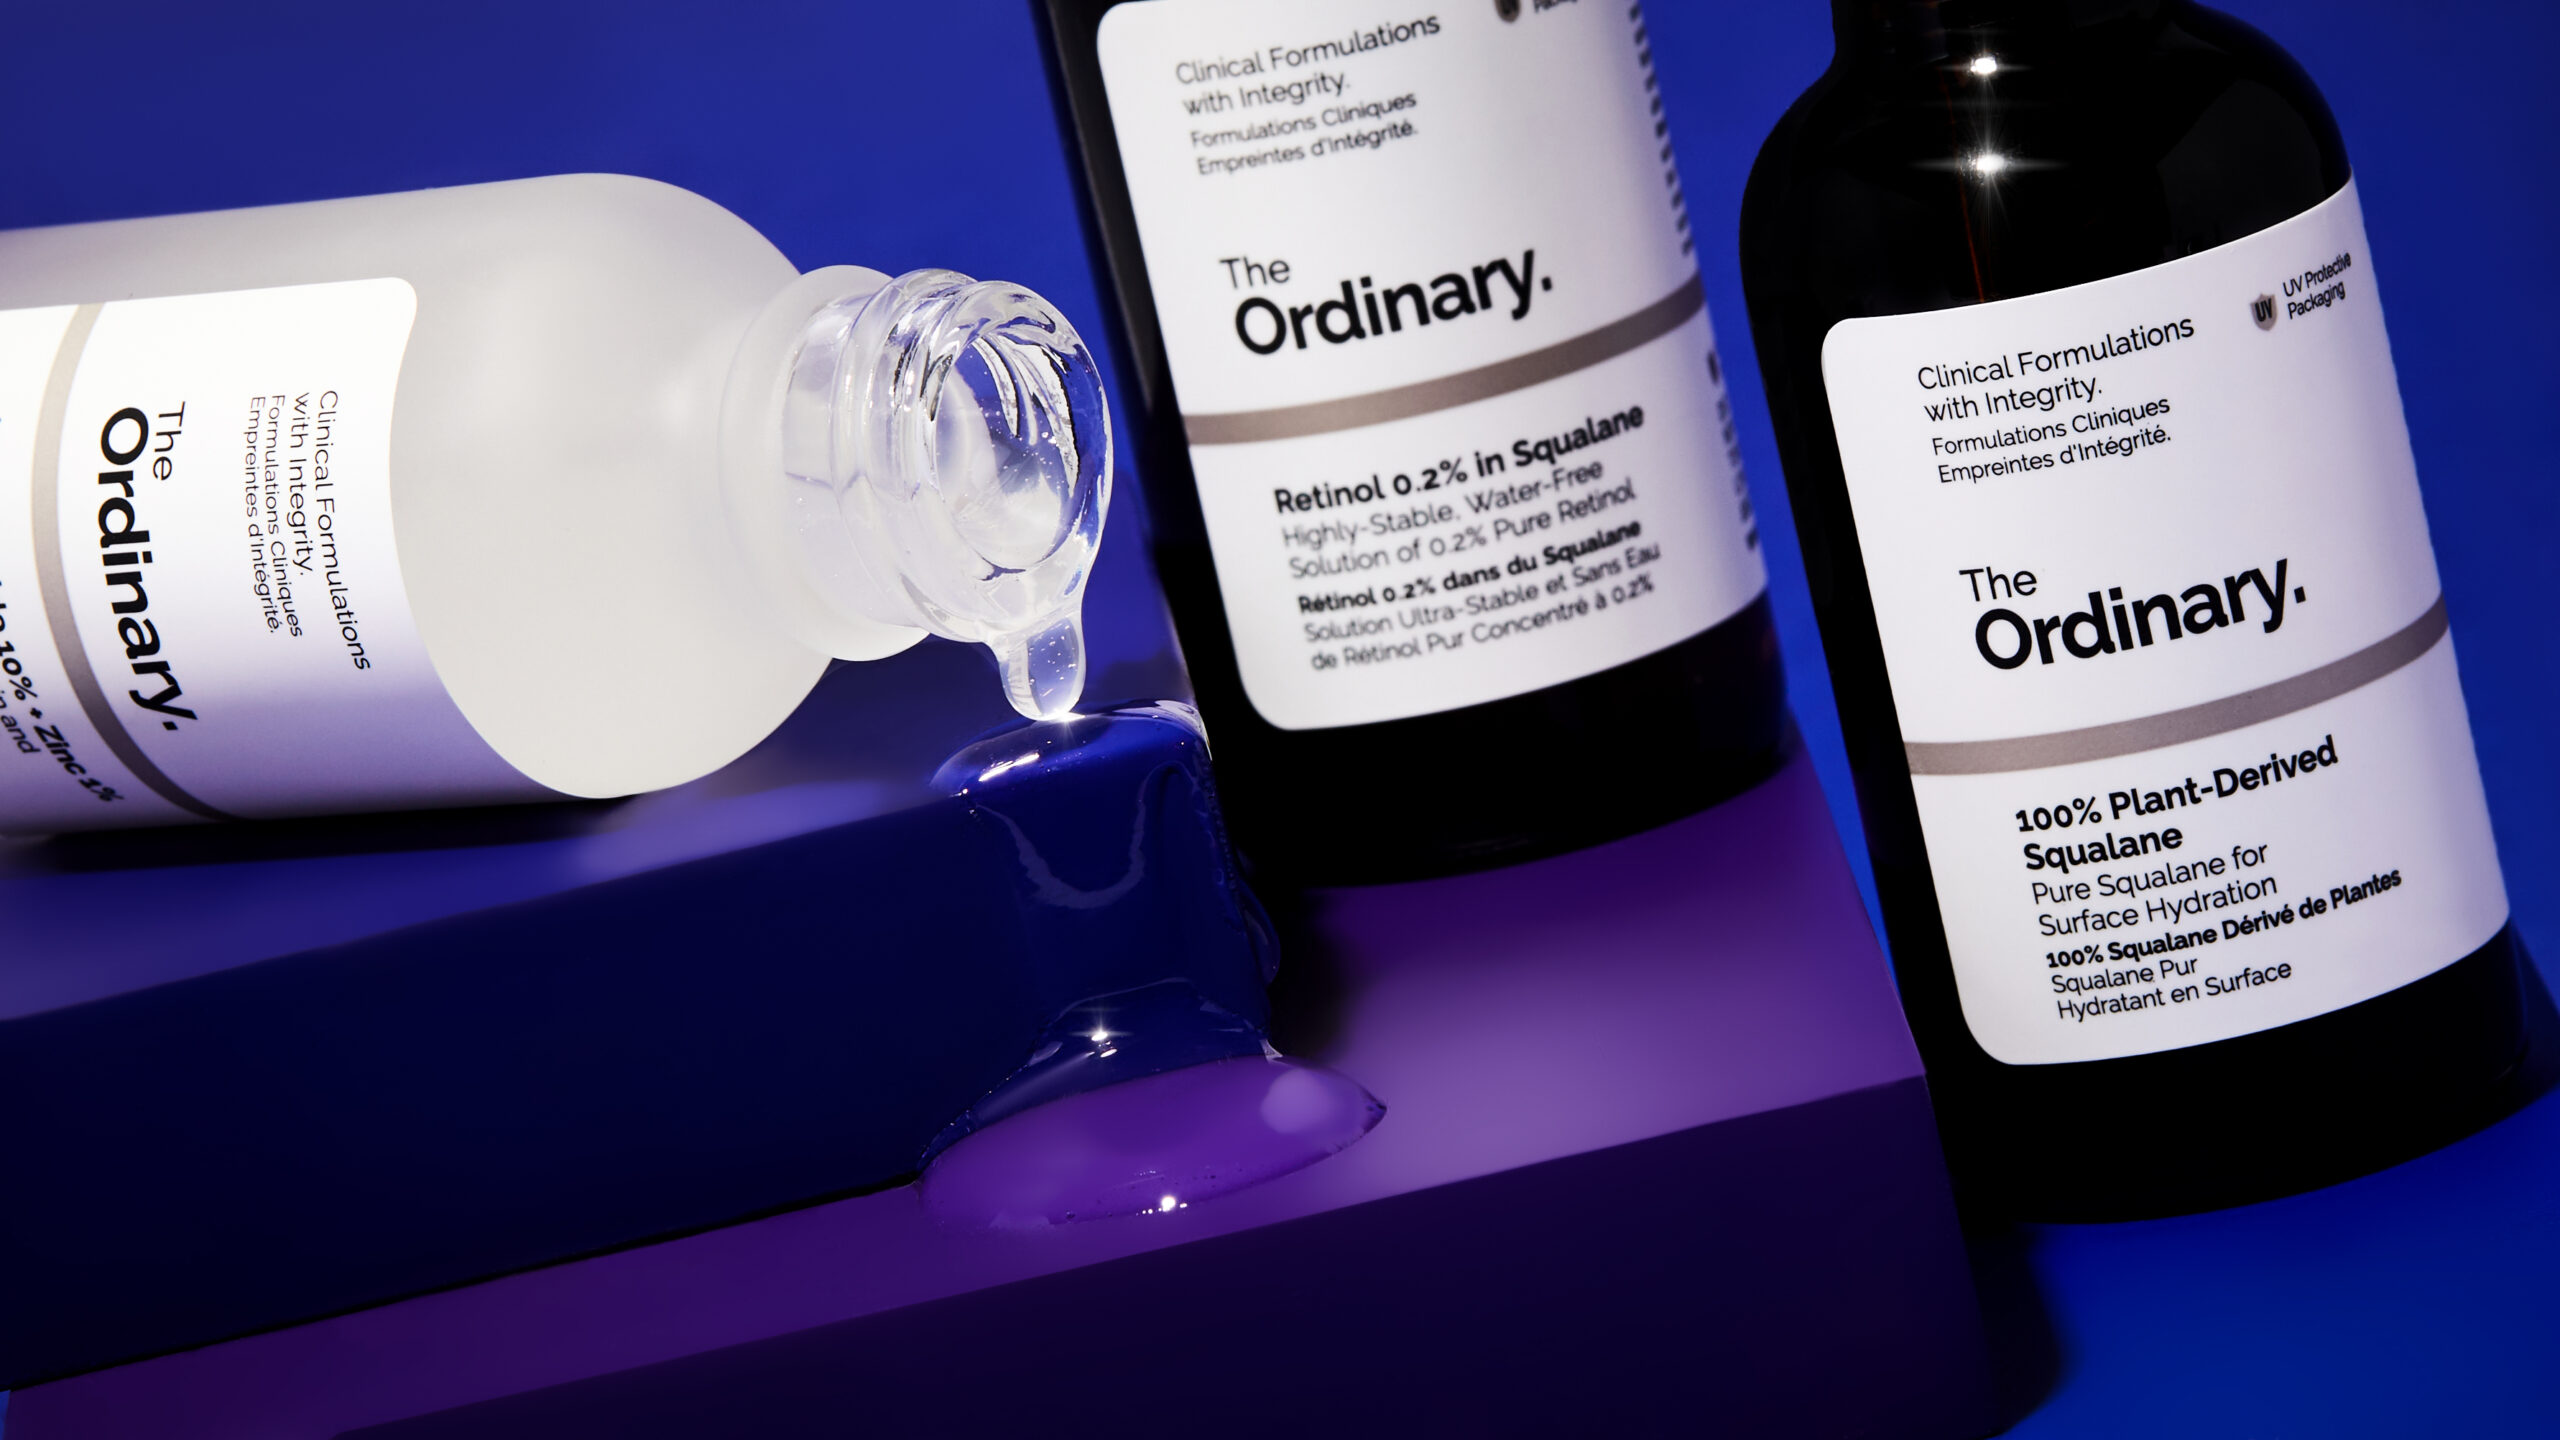 The Best The Ordinary Products For Acne-Prone Skin - Beauty Bay Edited